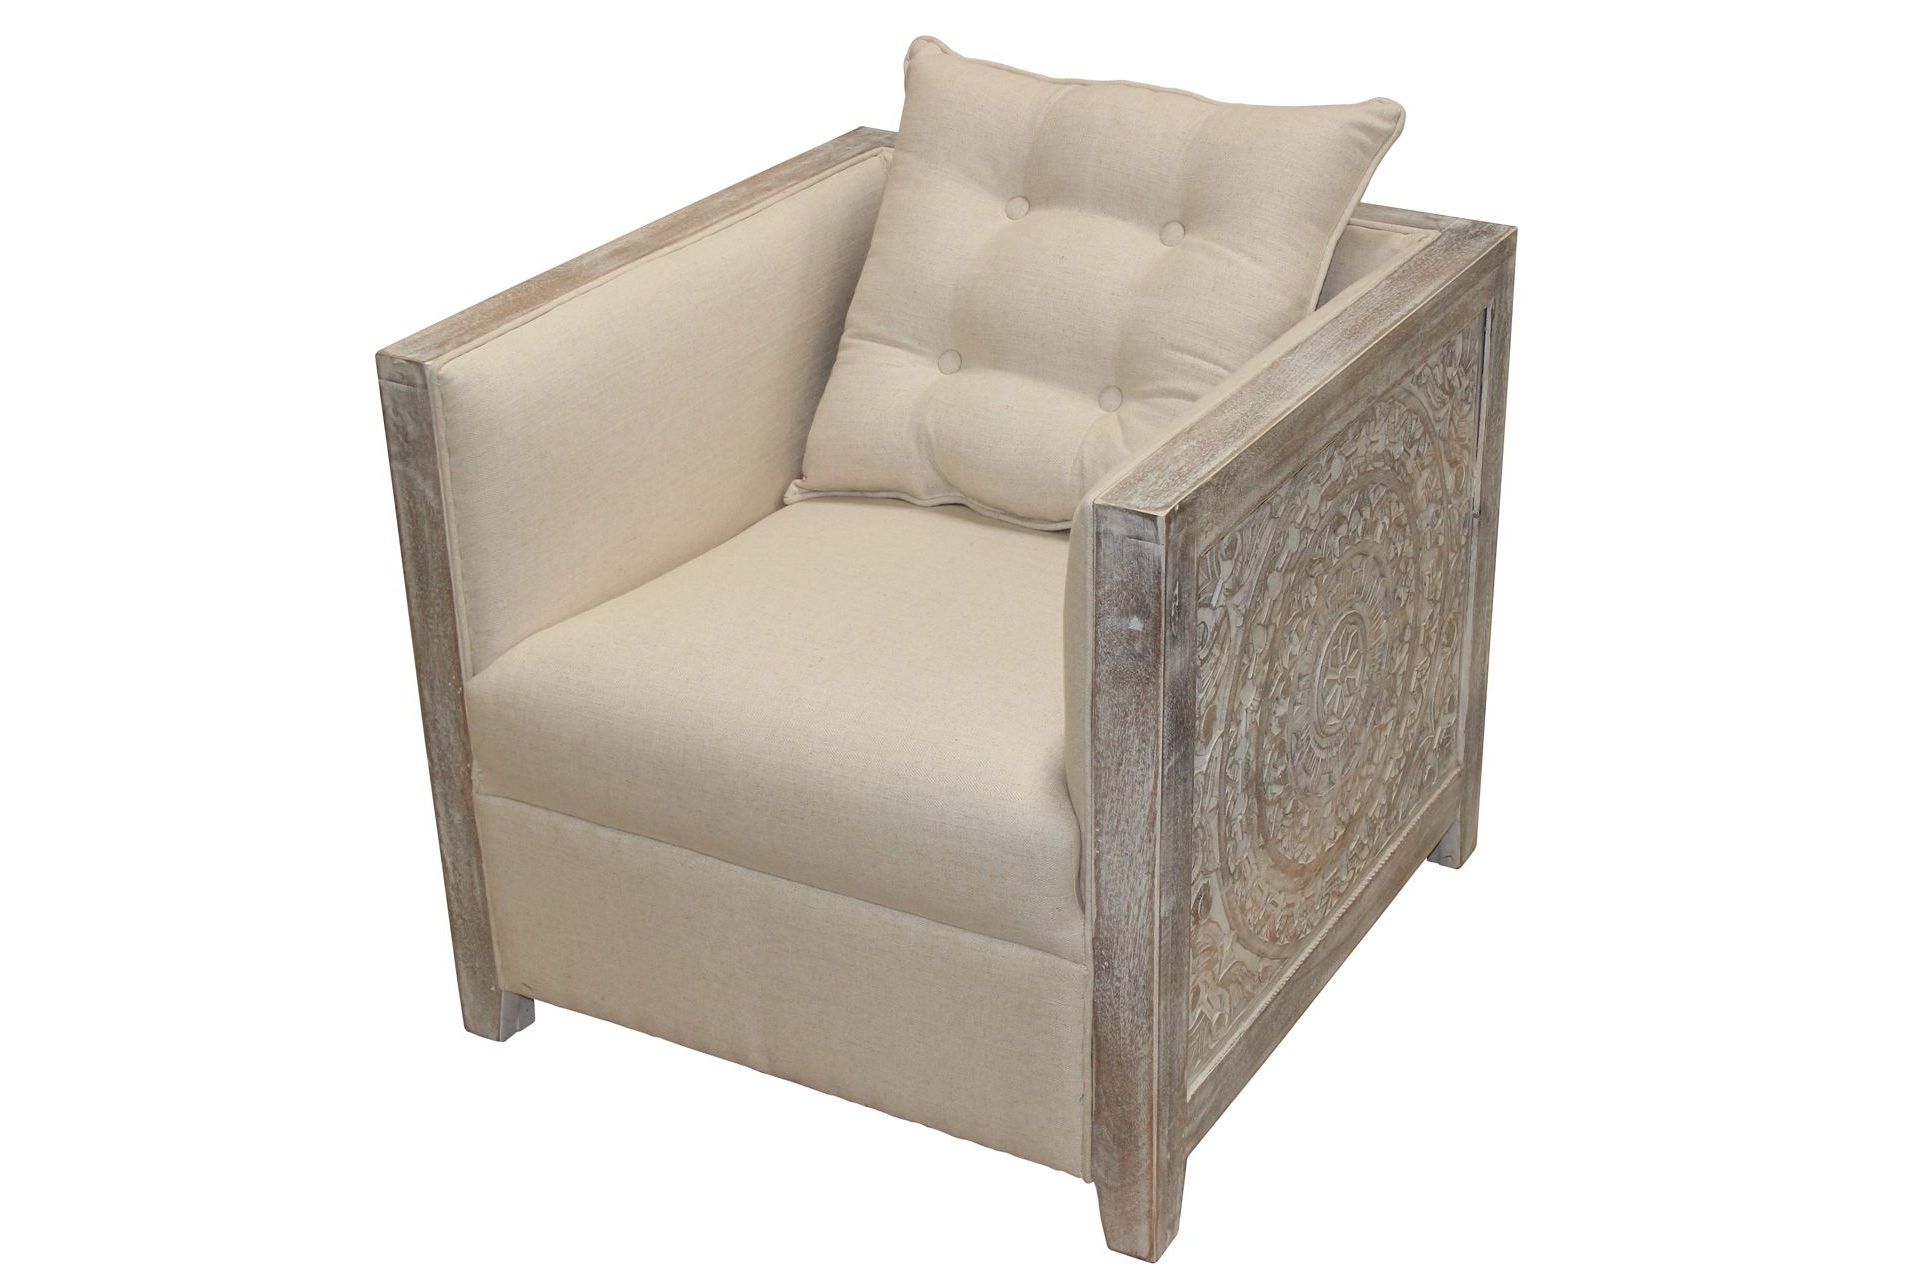 Carved Starburst White Wash Accent Chair (View 4 of 10)